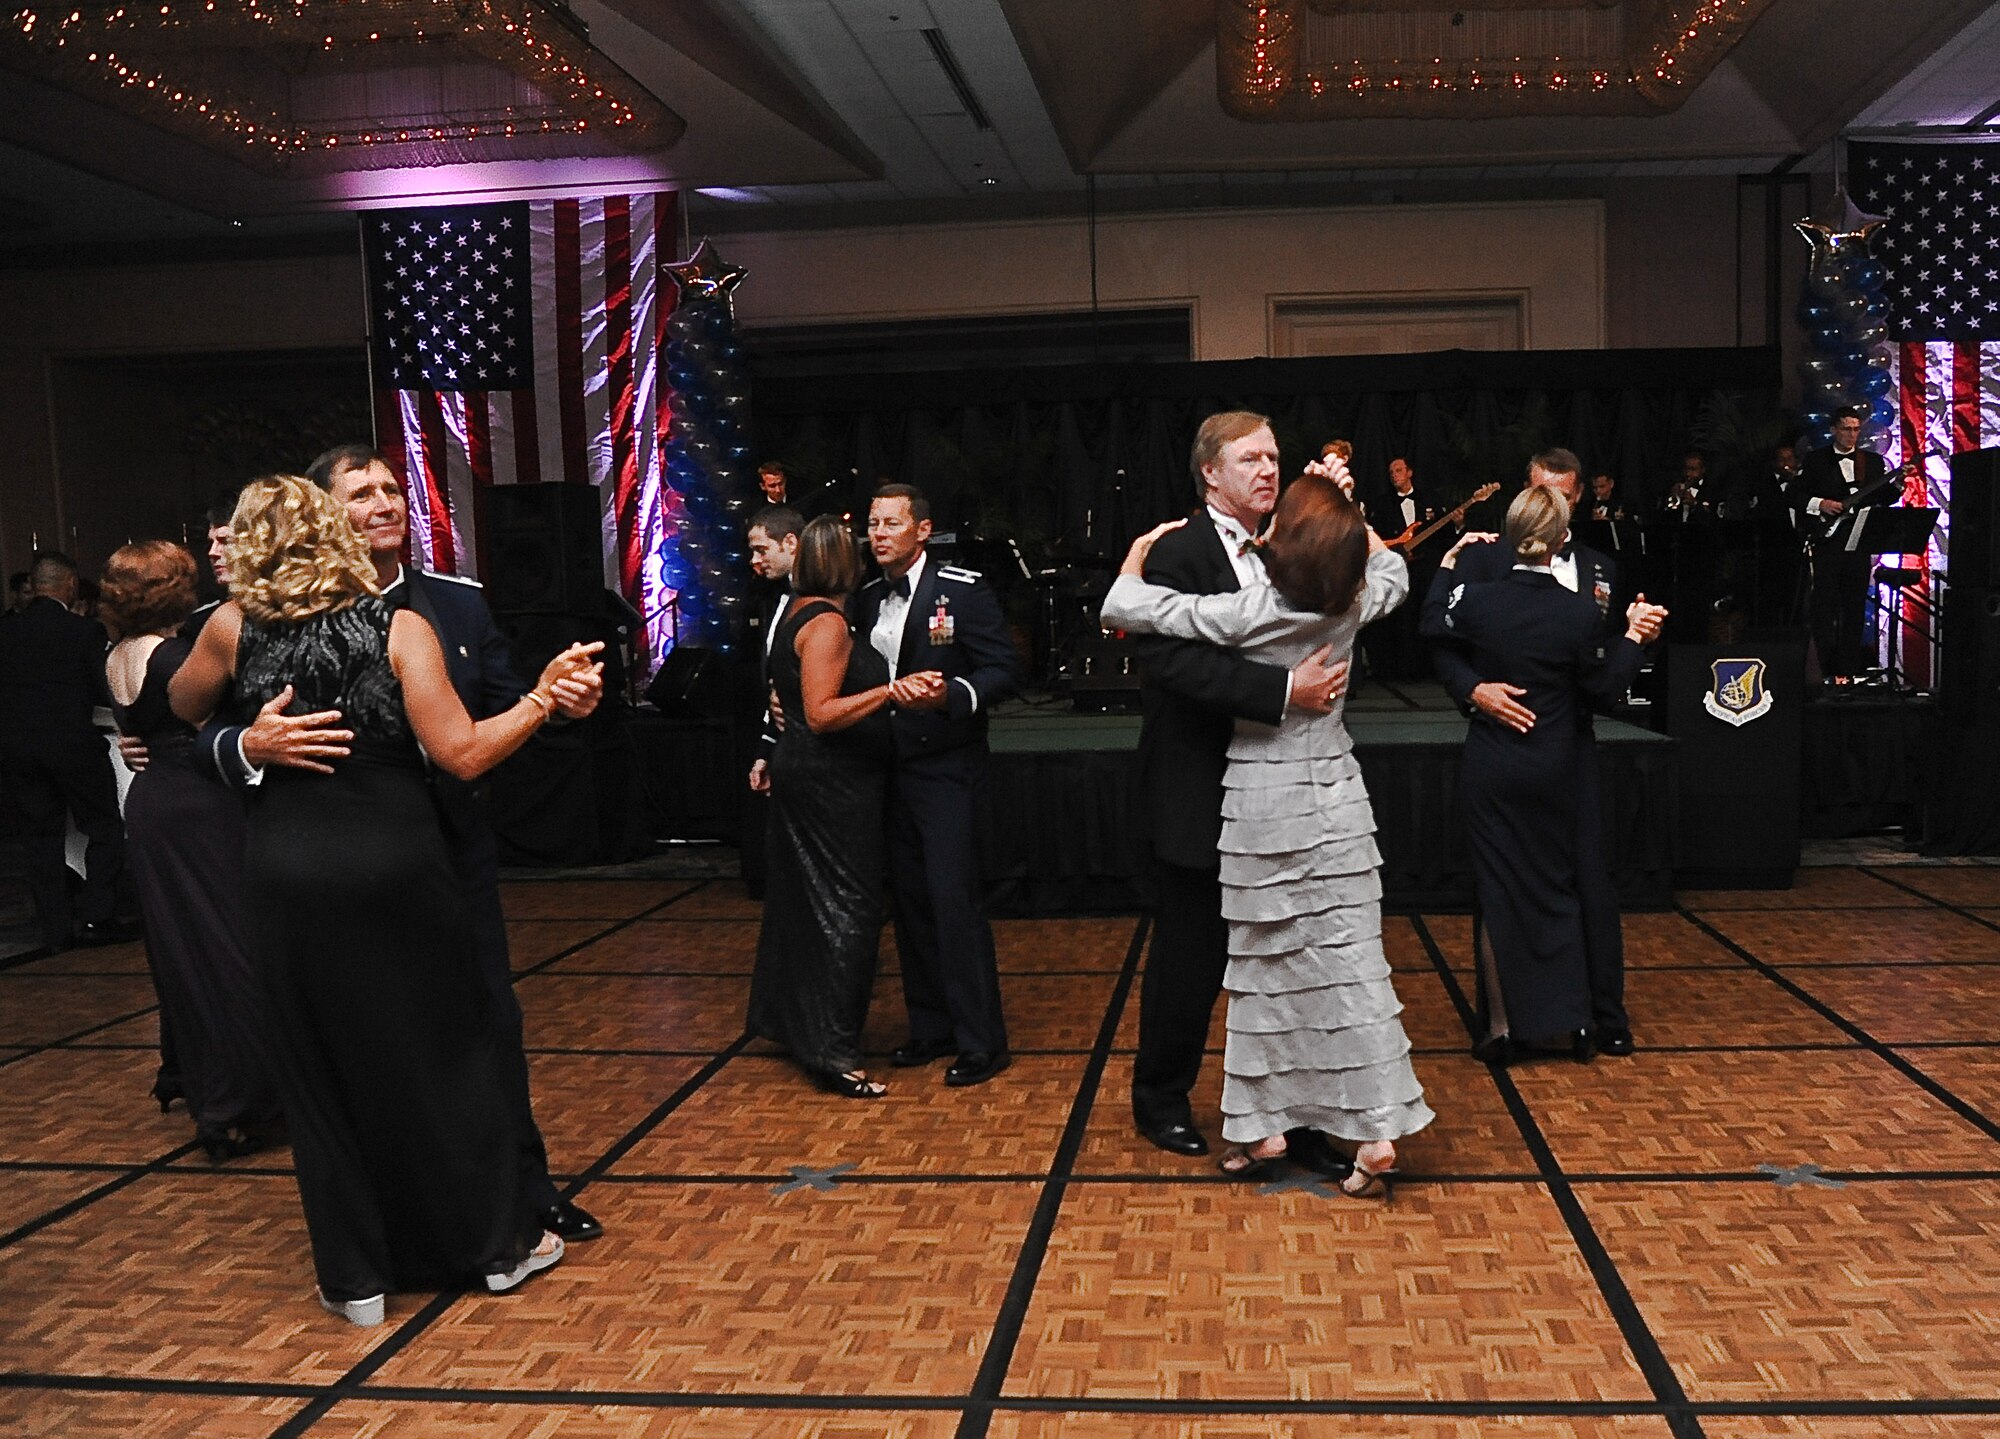 Airmen and guests begin to fill the dance floor at the 64th annual Air Force Ball, held at the Hilton Hawaiian Village in Waikiki, Sept. 16. The ball celebrated the Air Force's 64th year as a seperate service and paid tribute to the heroes that have served throughout its history. (U.S. Air Force photo/Senior Airman Lauren Main)